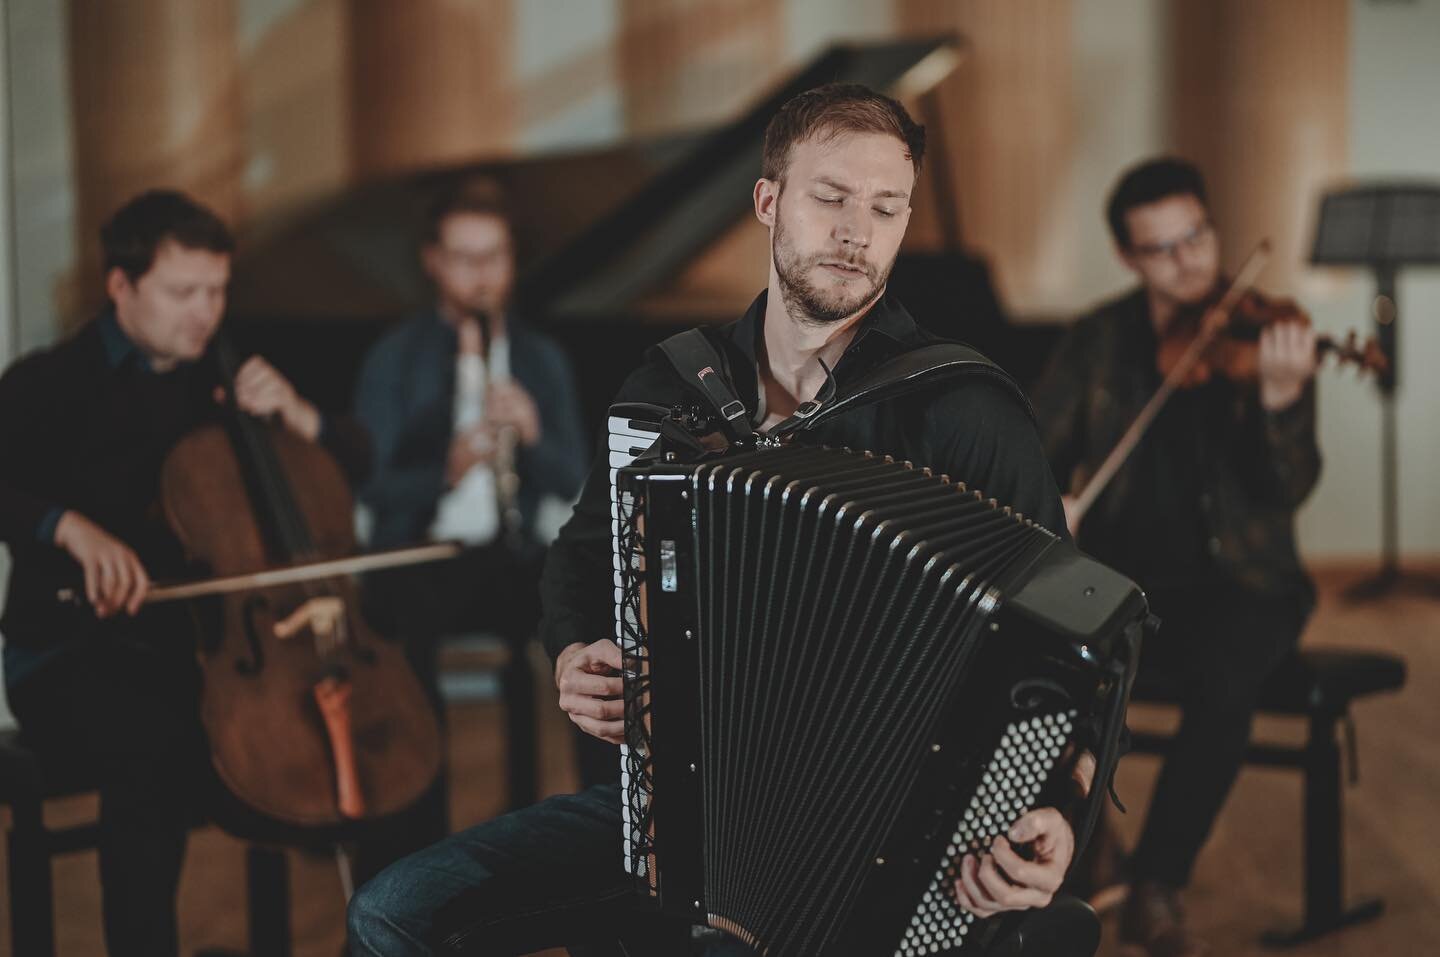 Our youngest member is accordionist Bogdan Laketic, who actively performs all over the world at illustrious festivals and venues, as a soloist or a member of his other ensemble, prize-winning Duo Aliada. He is also just politely laughing when he does